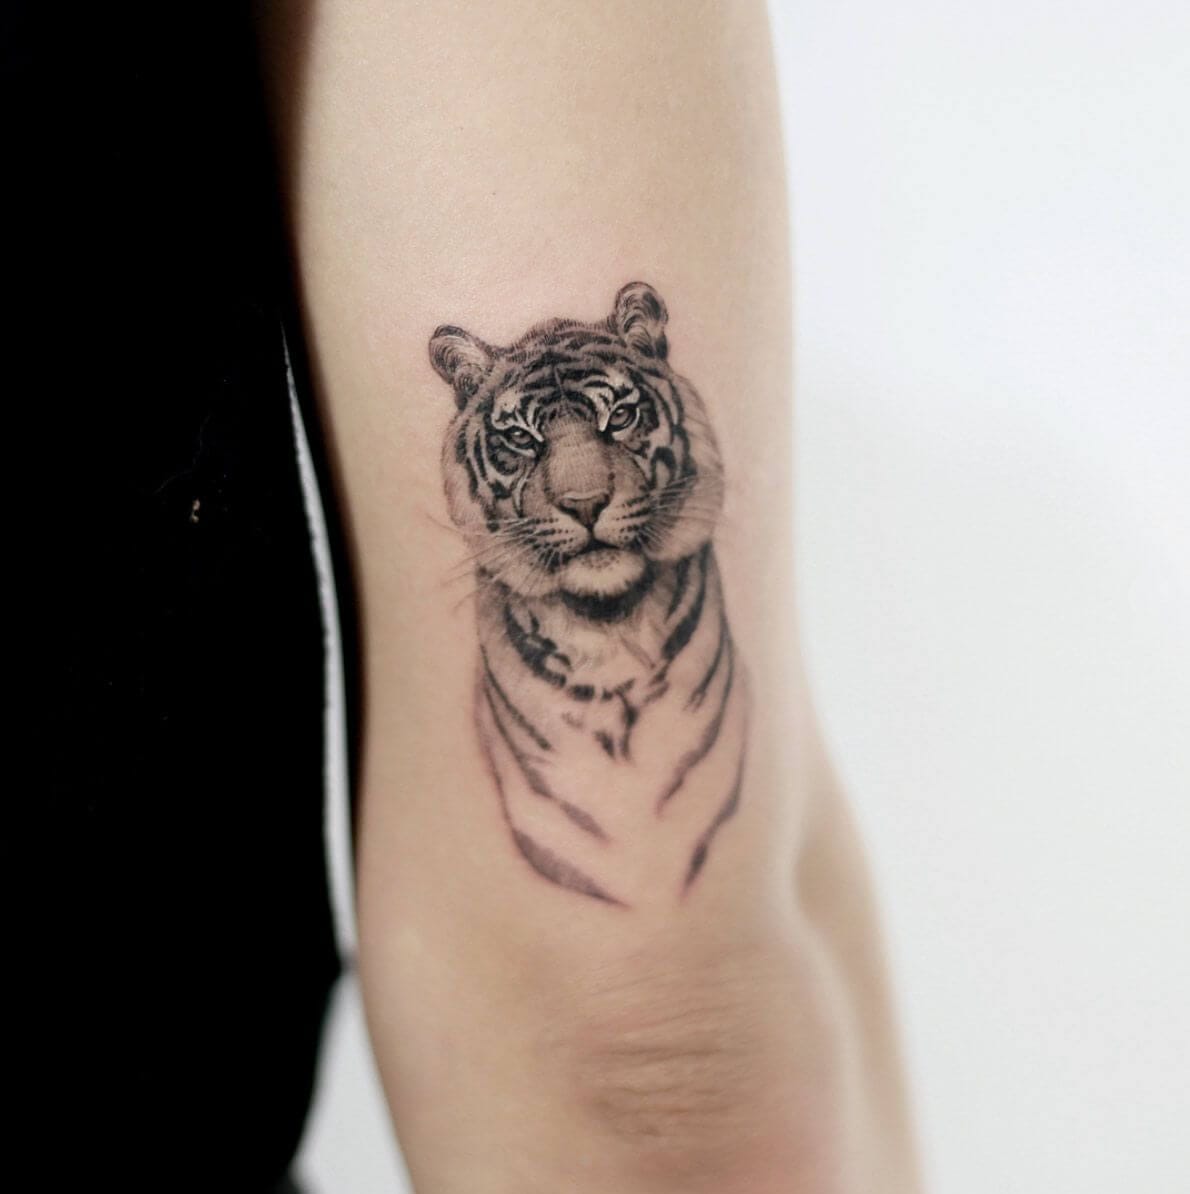 What Does a Tiger Tattoo Mean? The True Meaning of Tiger Tattoos